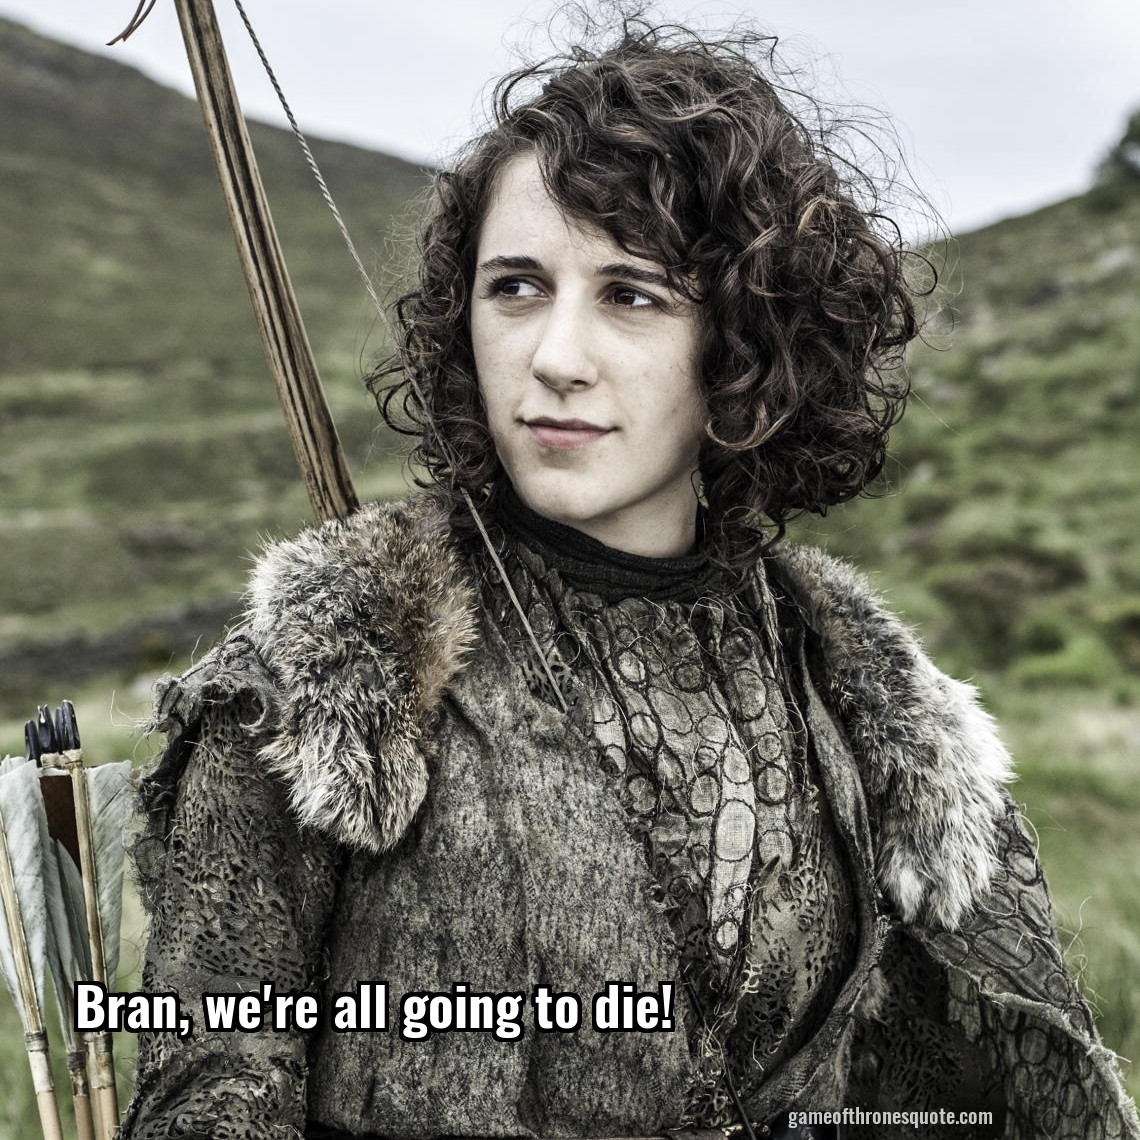 Bran, we're all going to die!